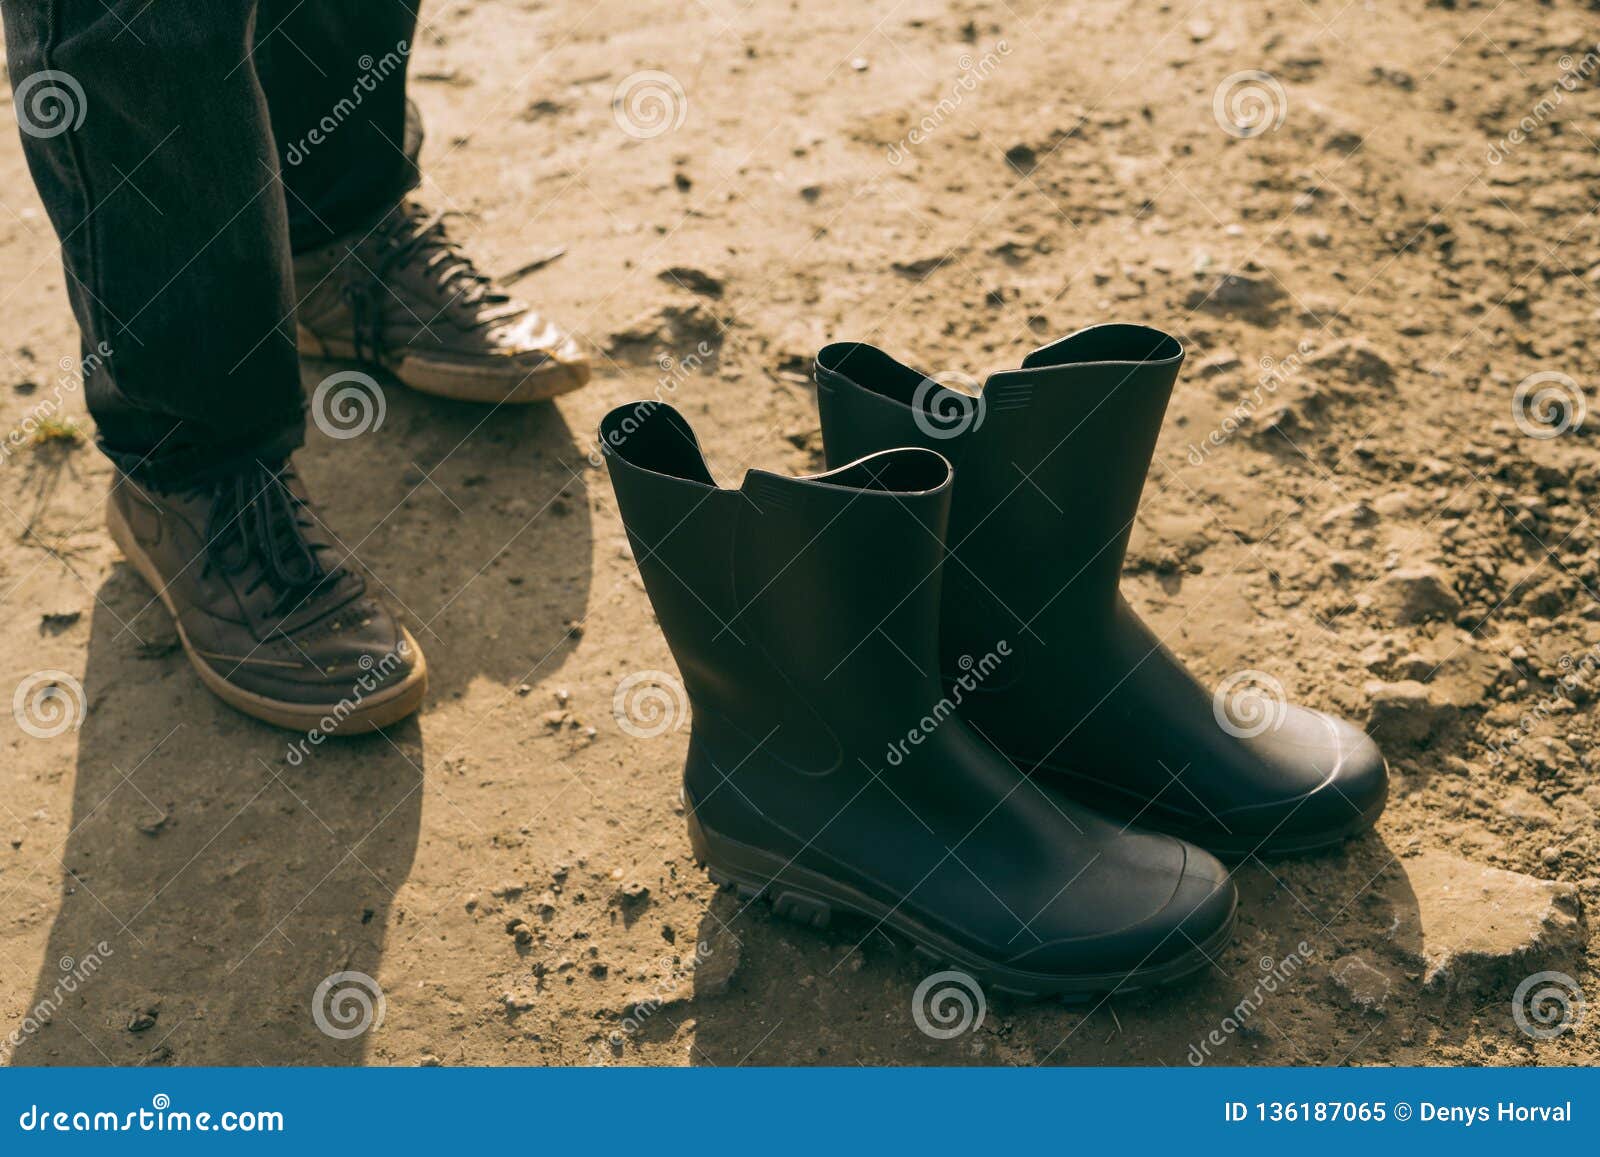 Feets and Clean Boots at Muddy Ground Stock Image - Image of boot, pair ...